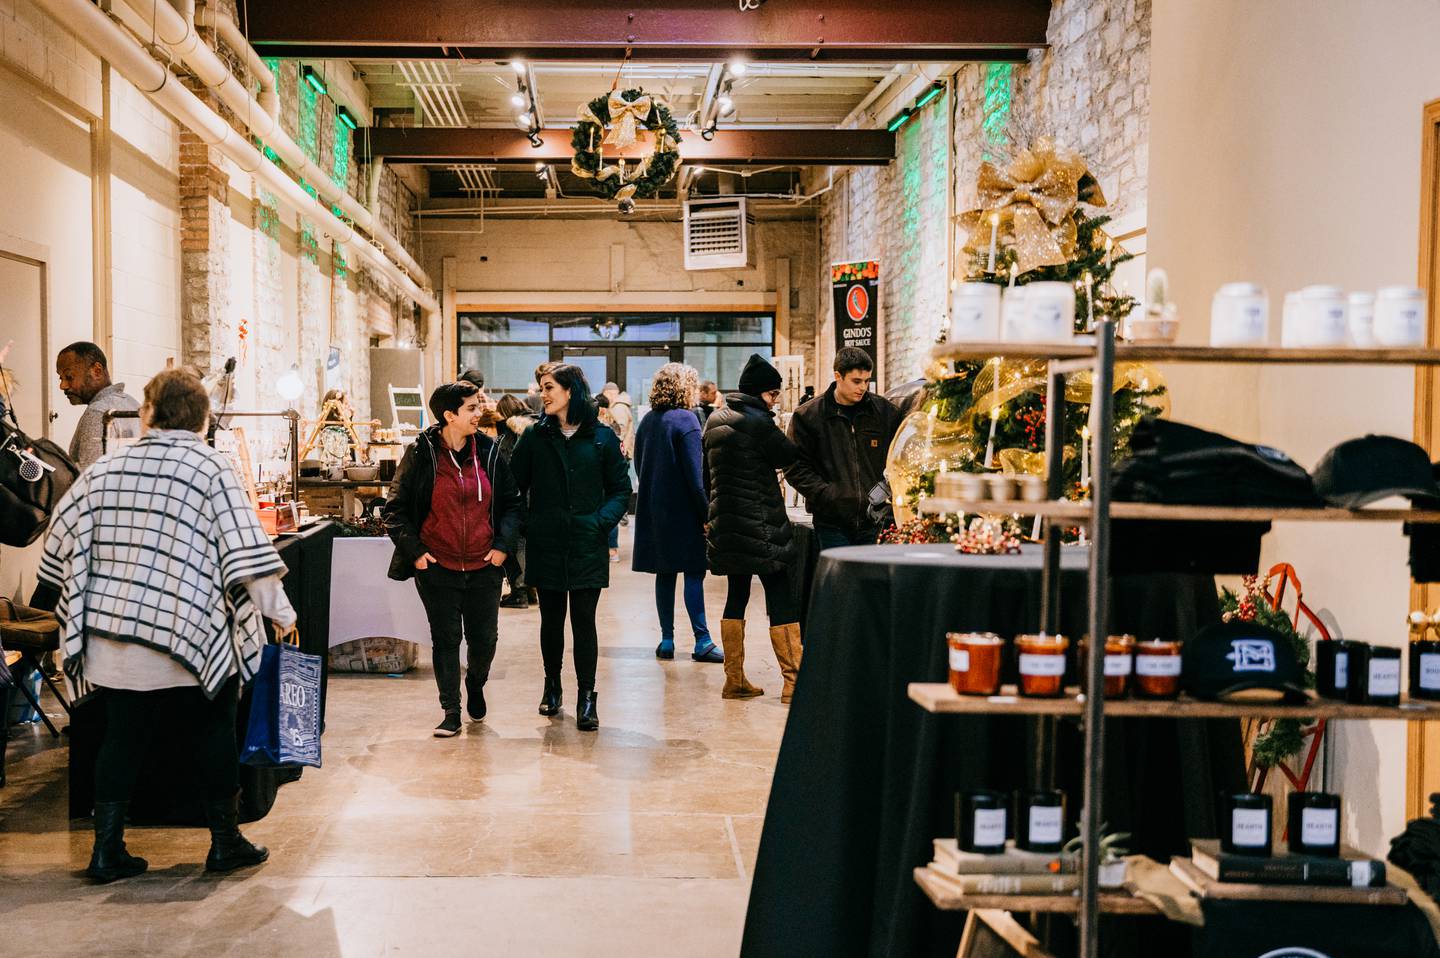 Water Street Studios and Batavia MainStreet are teaming up to present the Winterfest Art Market, a unique holiday shopping event Nov. 10, 11 and 12. The event will span multiple venues, including Water Street Studios, the Dock, Hearth & Hammer, Kiss the Sky and Sturdy Shelter Brewing with more than 35 vendors offering a wide variety of goods.